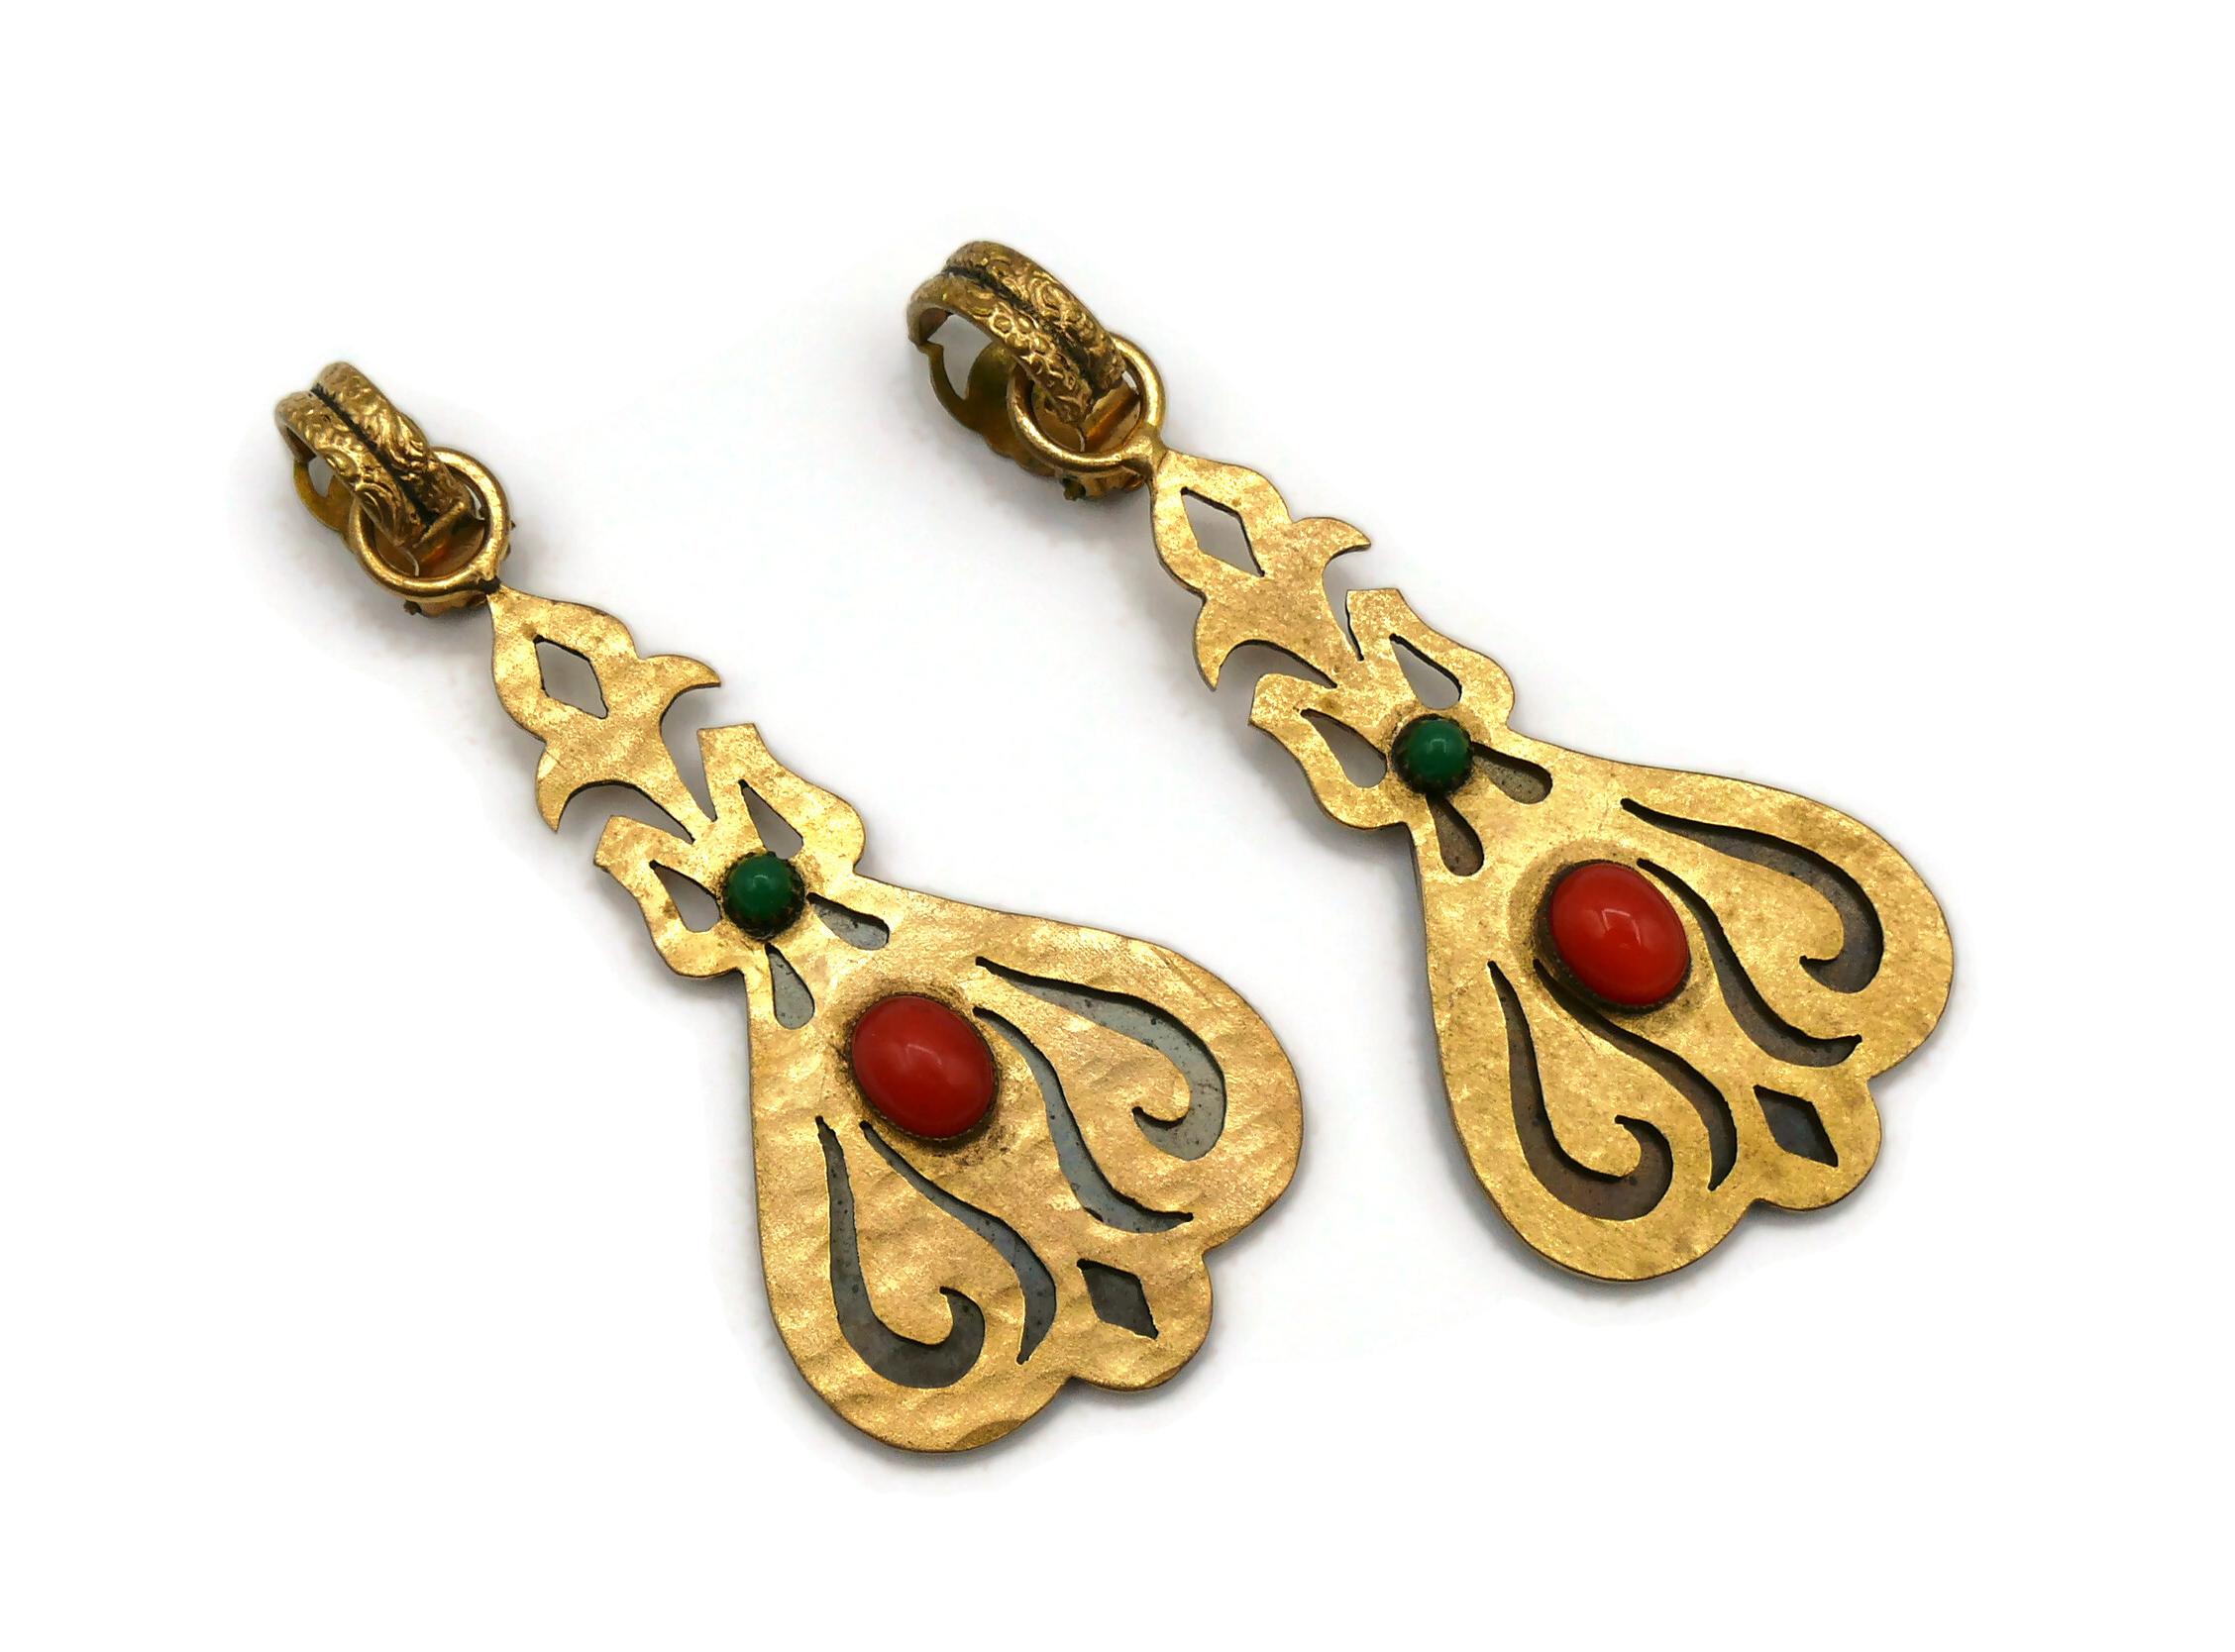 YVES SAINT LAURENT YSL Vintage Art Nouveau Inspired Dangling Earrings In Good Condition For Sale In Nice, FR